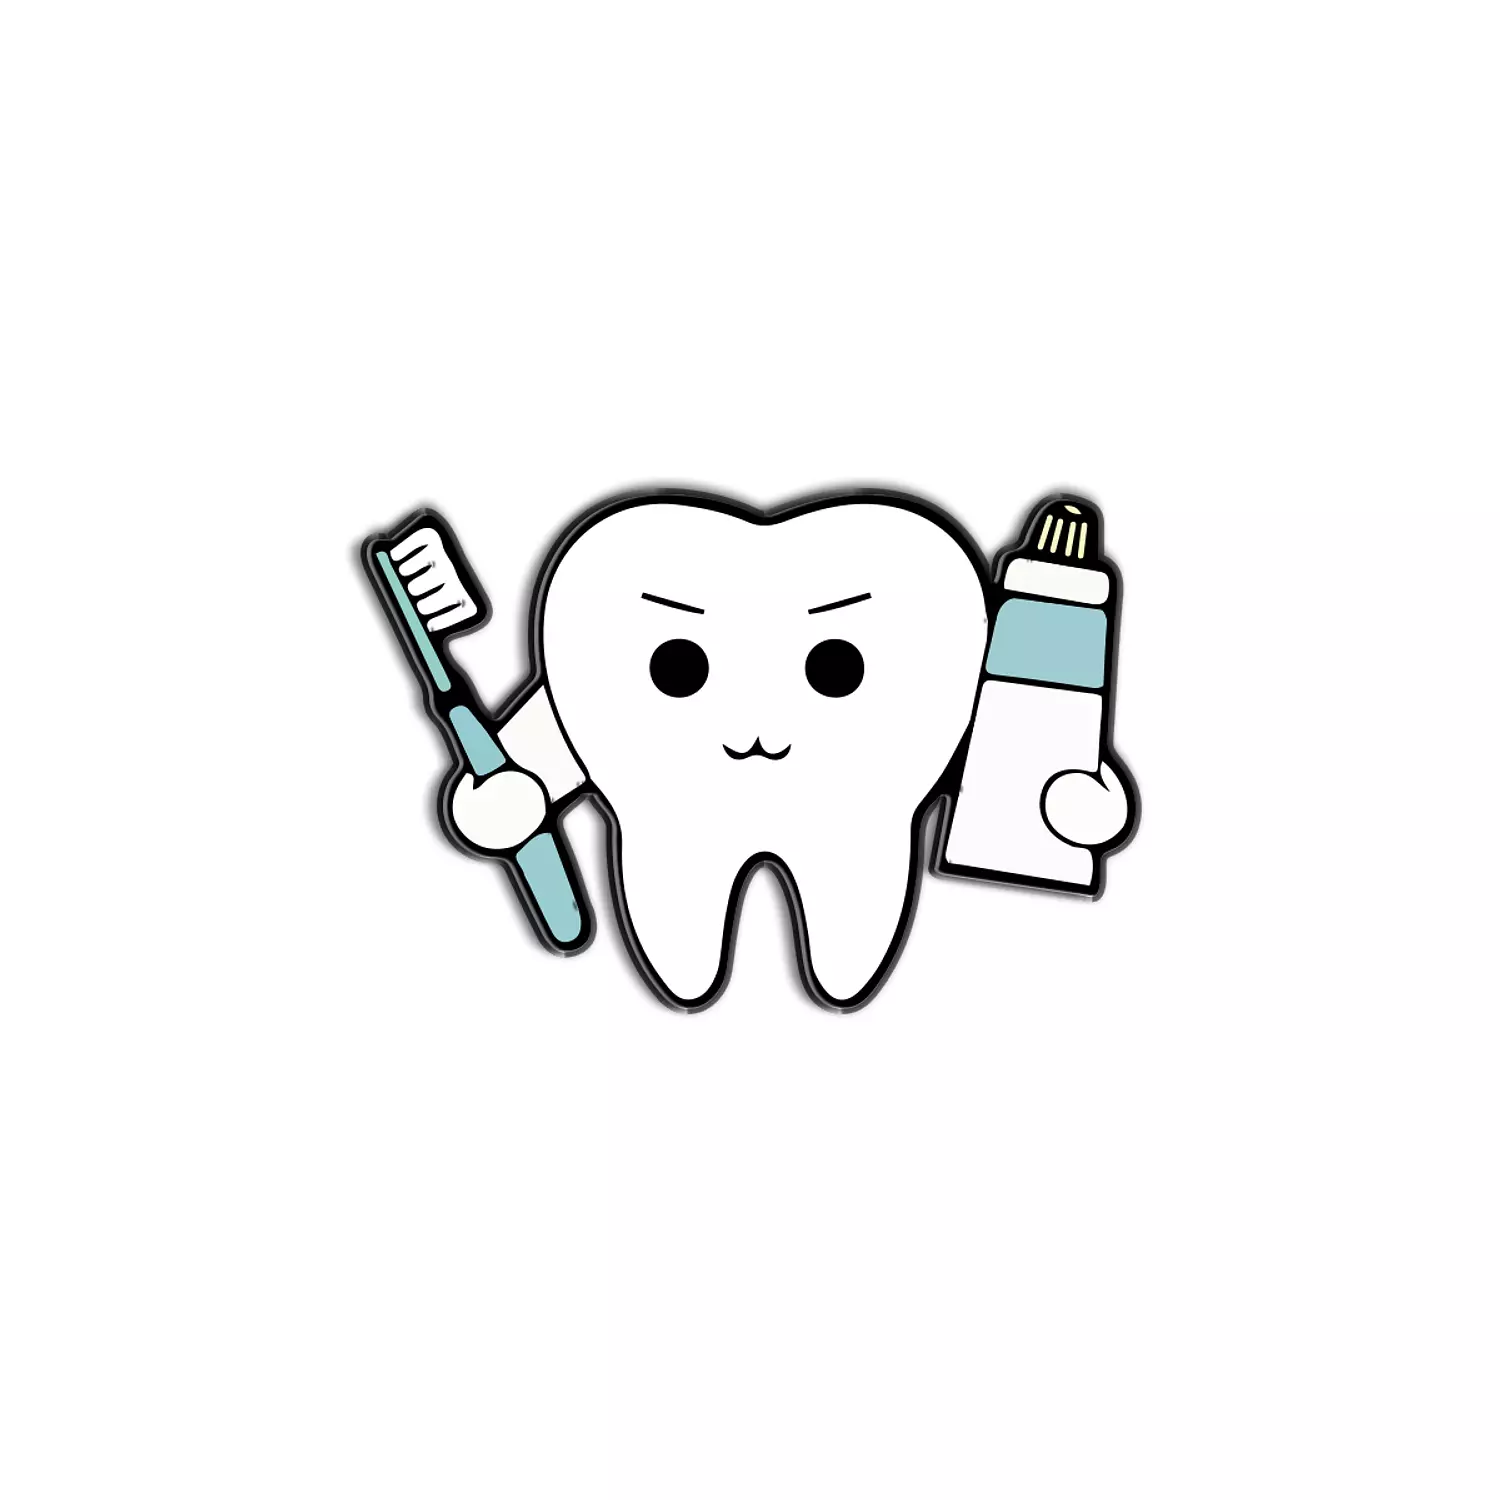  Brush 🪥 your Teeth 🦷 hover image